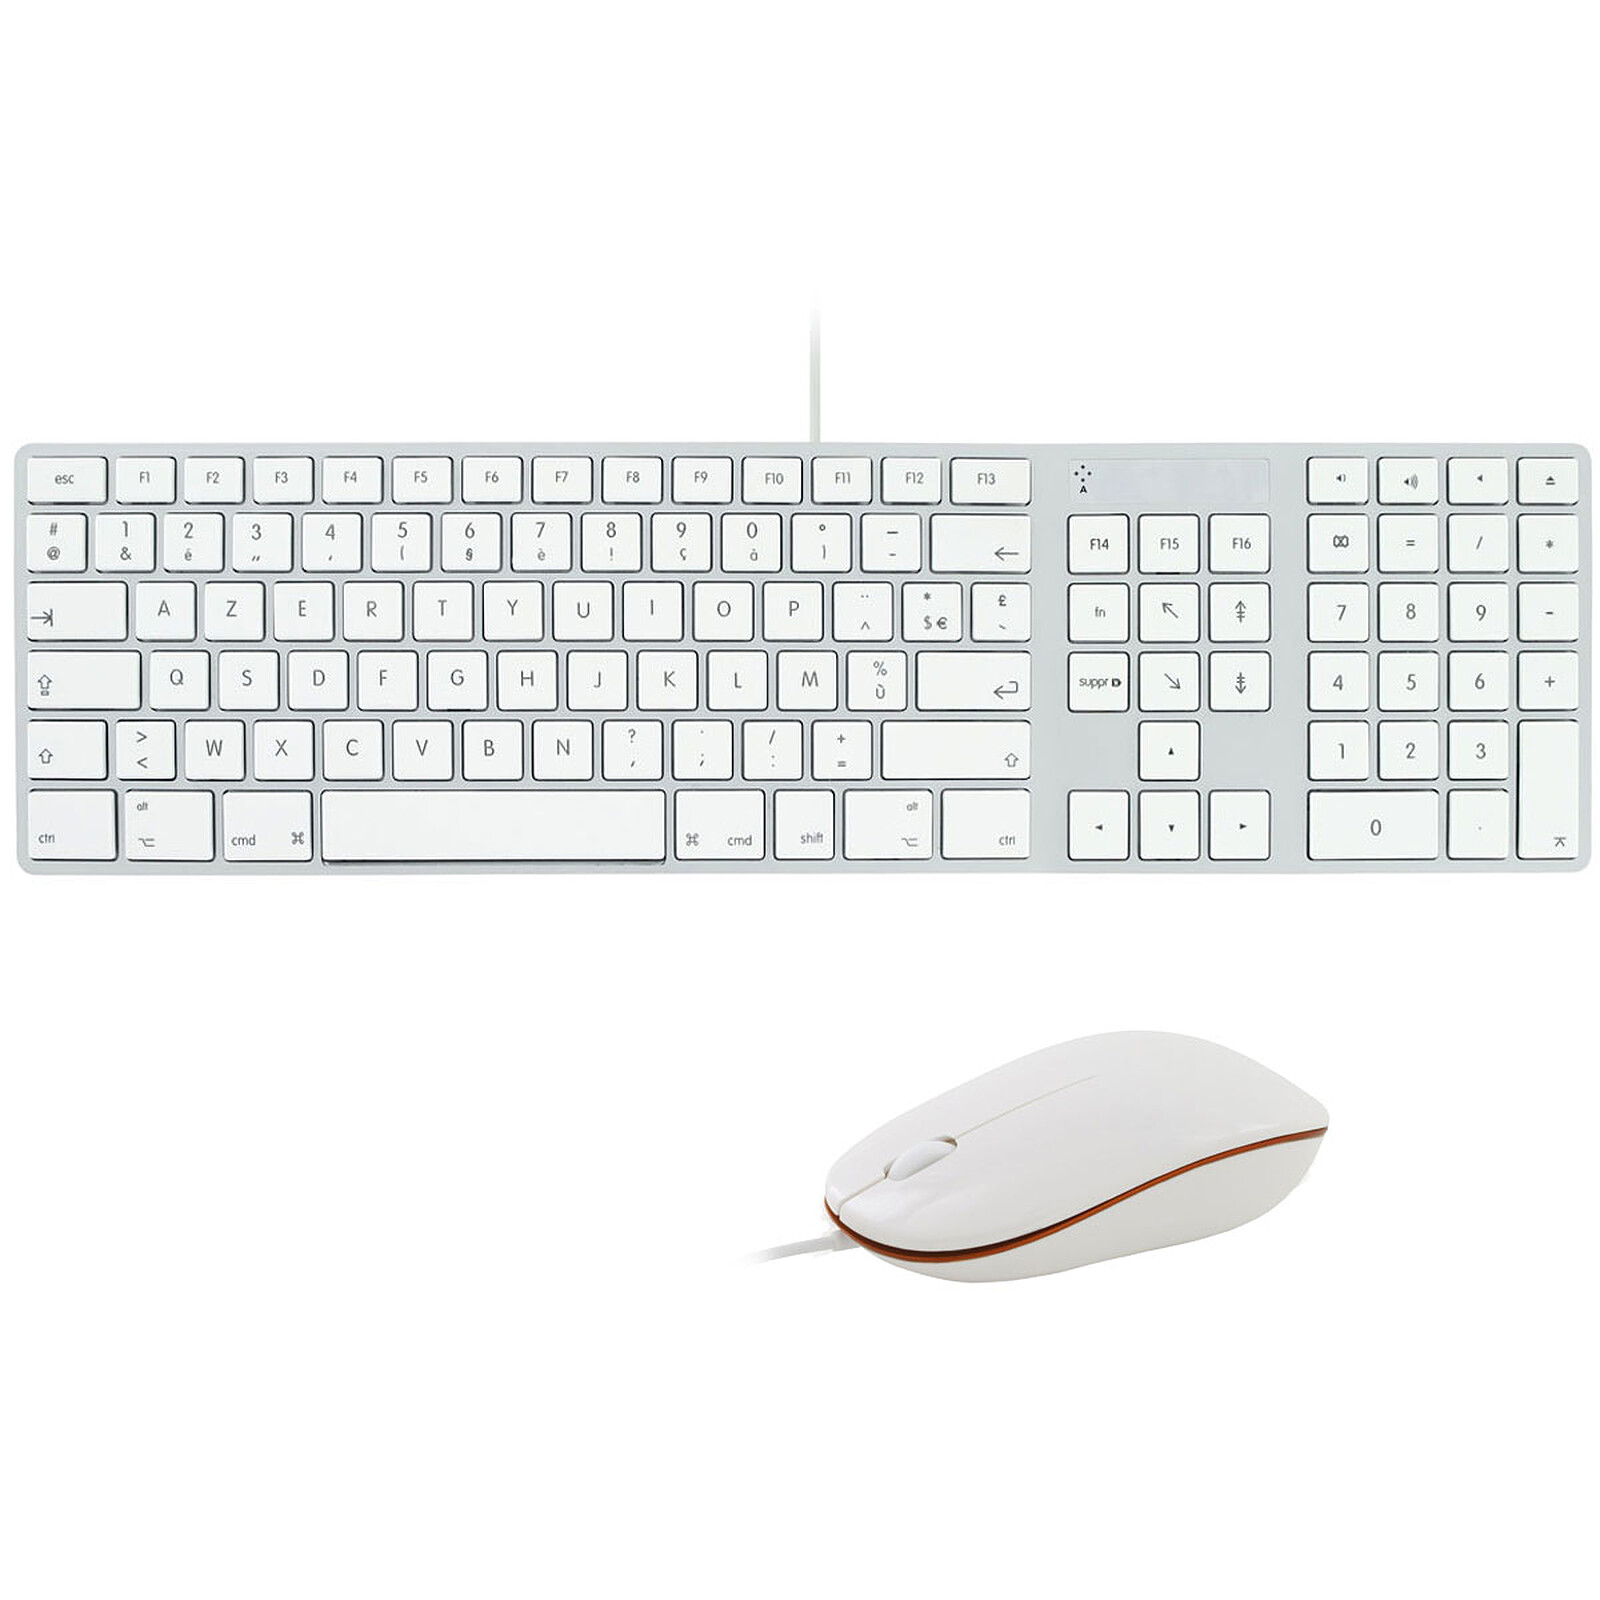 Mobility Lab Wired Desktop for Mac - Pack clavier souris - Garantie 3 ans  LDLC